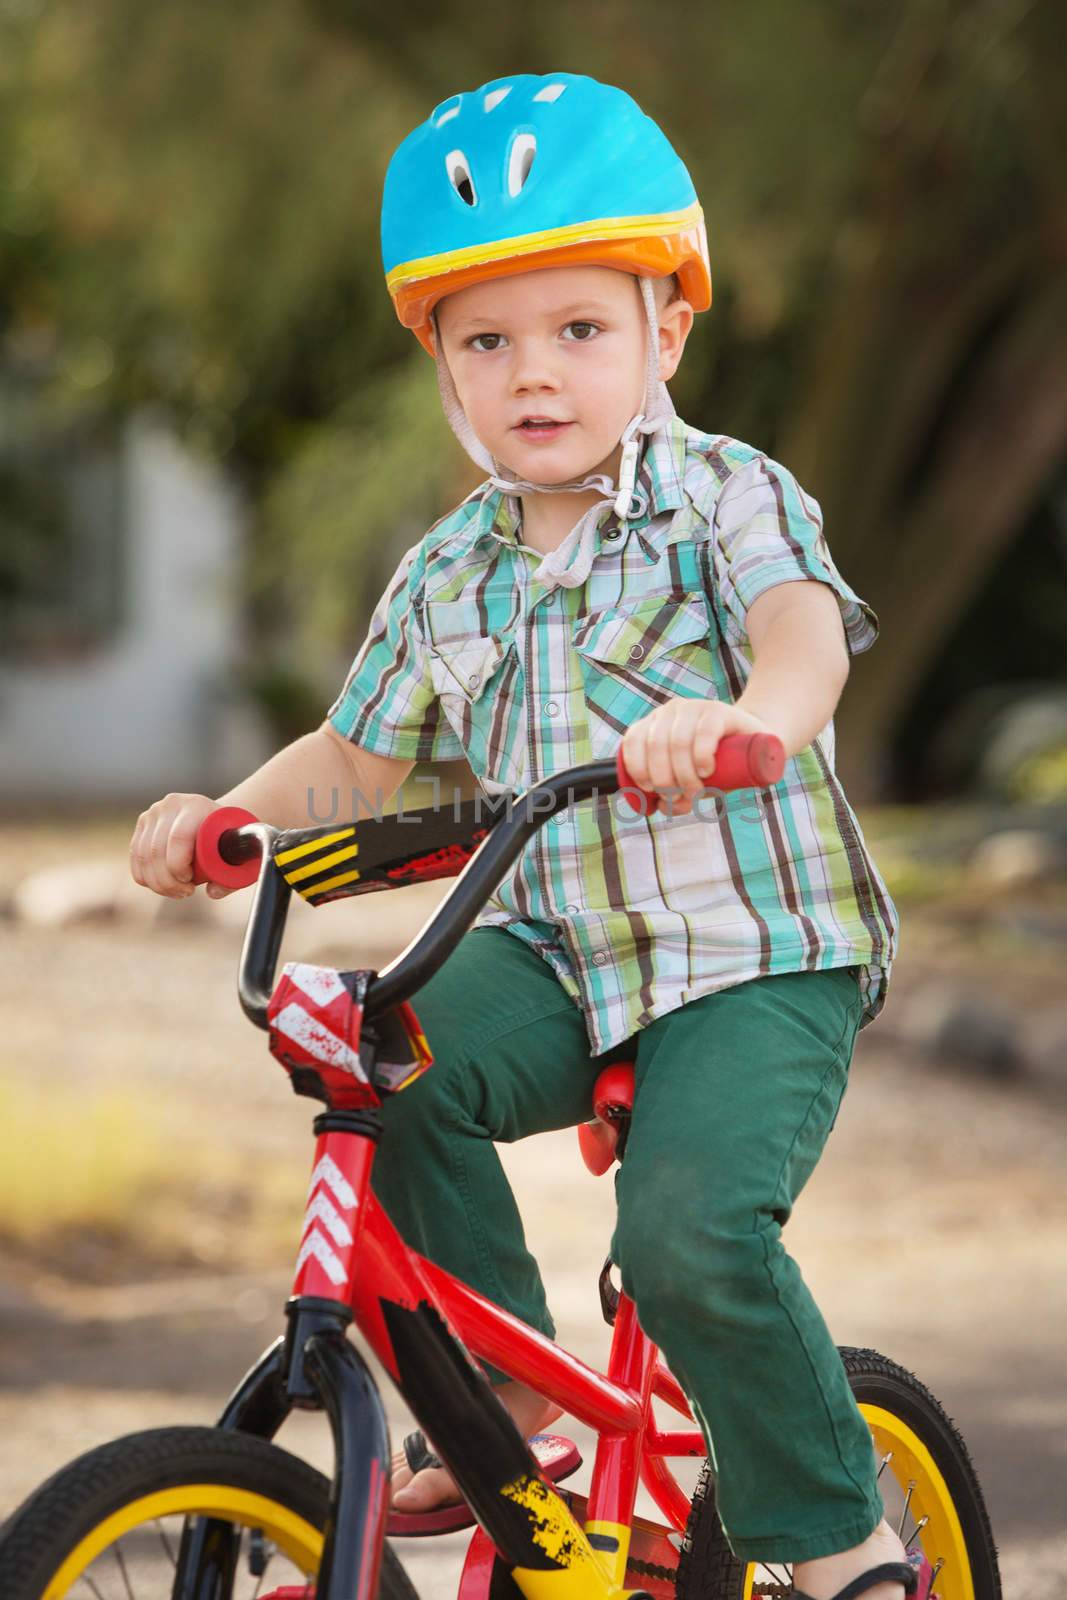 Single child in helmet riding a bicycle